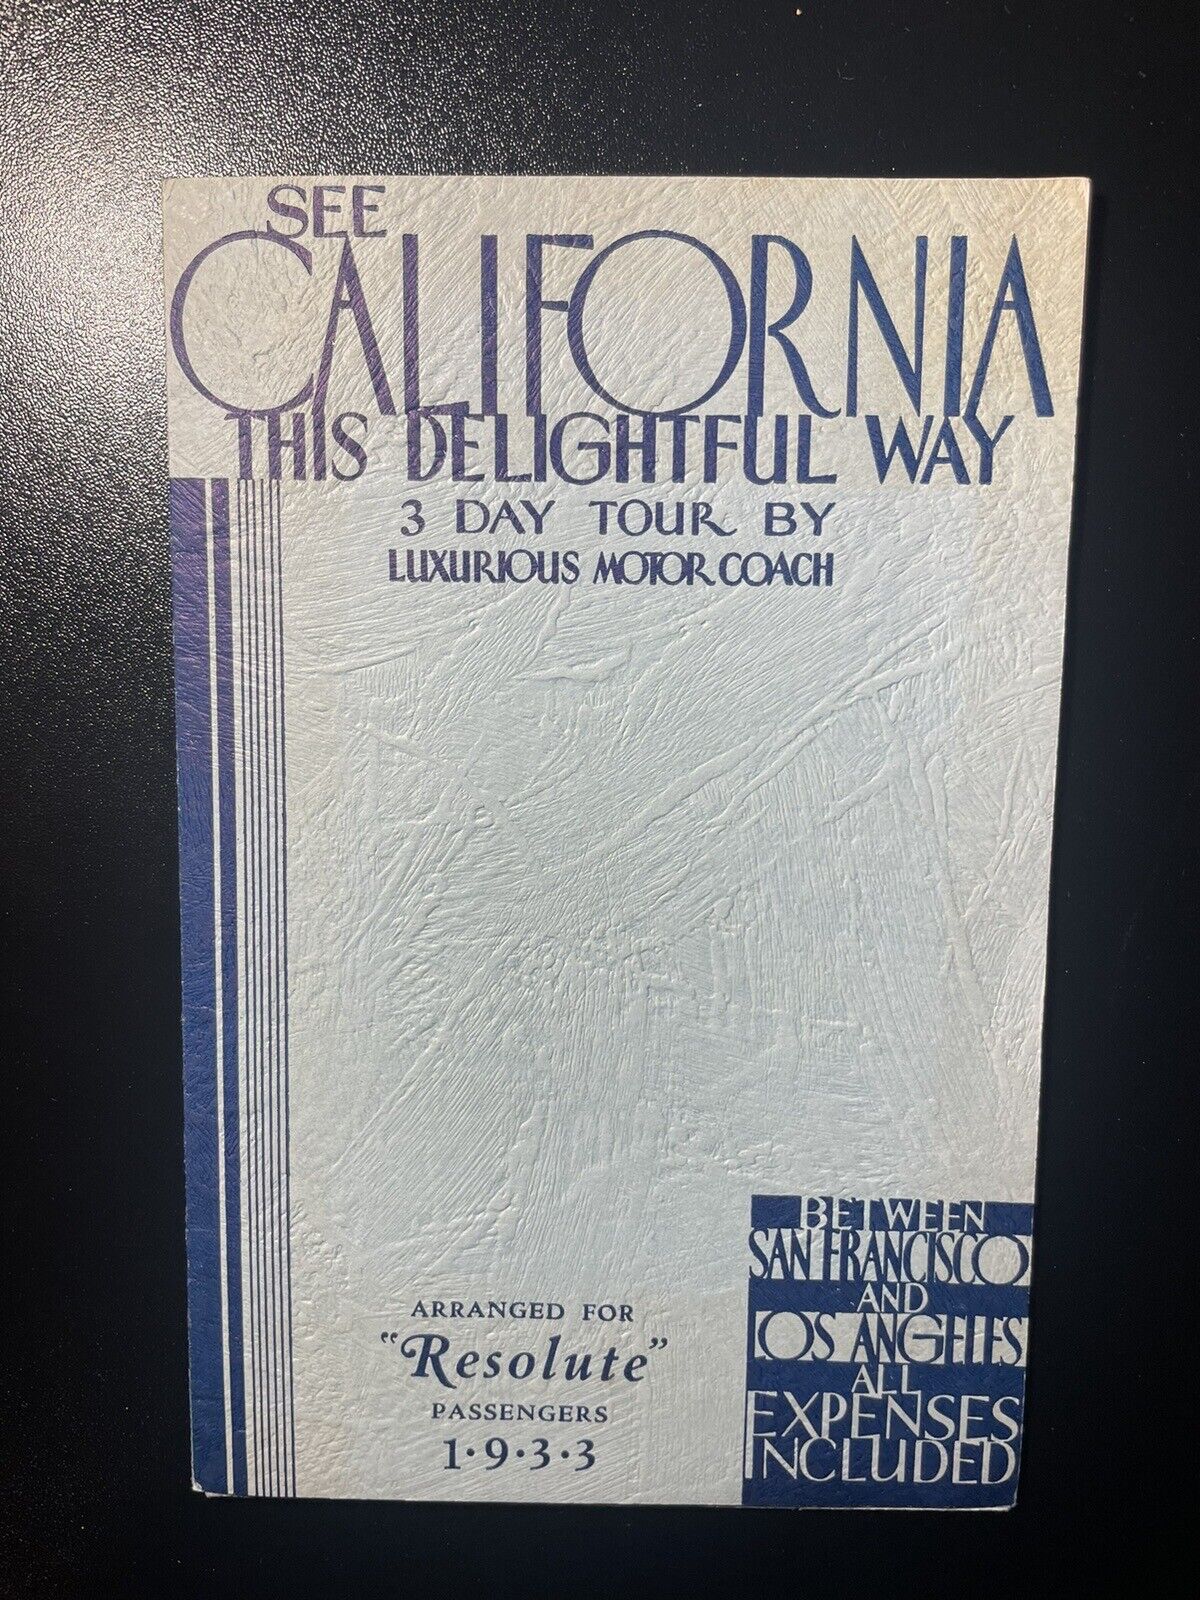 1933 Pamphlet: See California This Delightful Way 3 Day Tour by Motor Coach